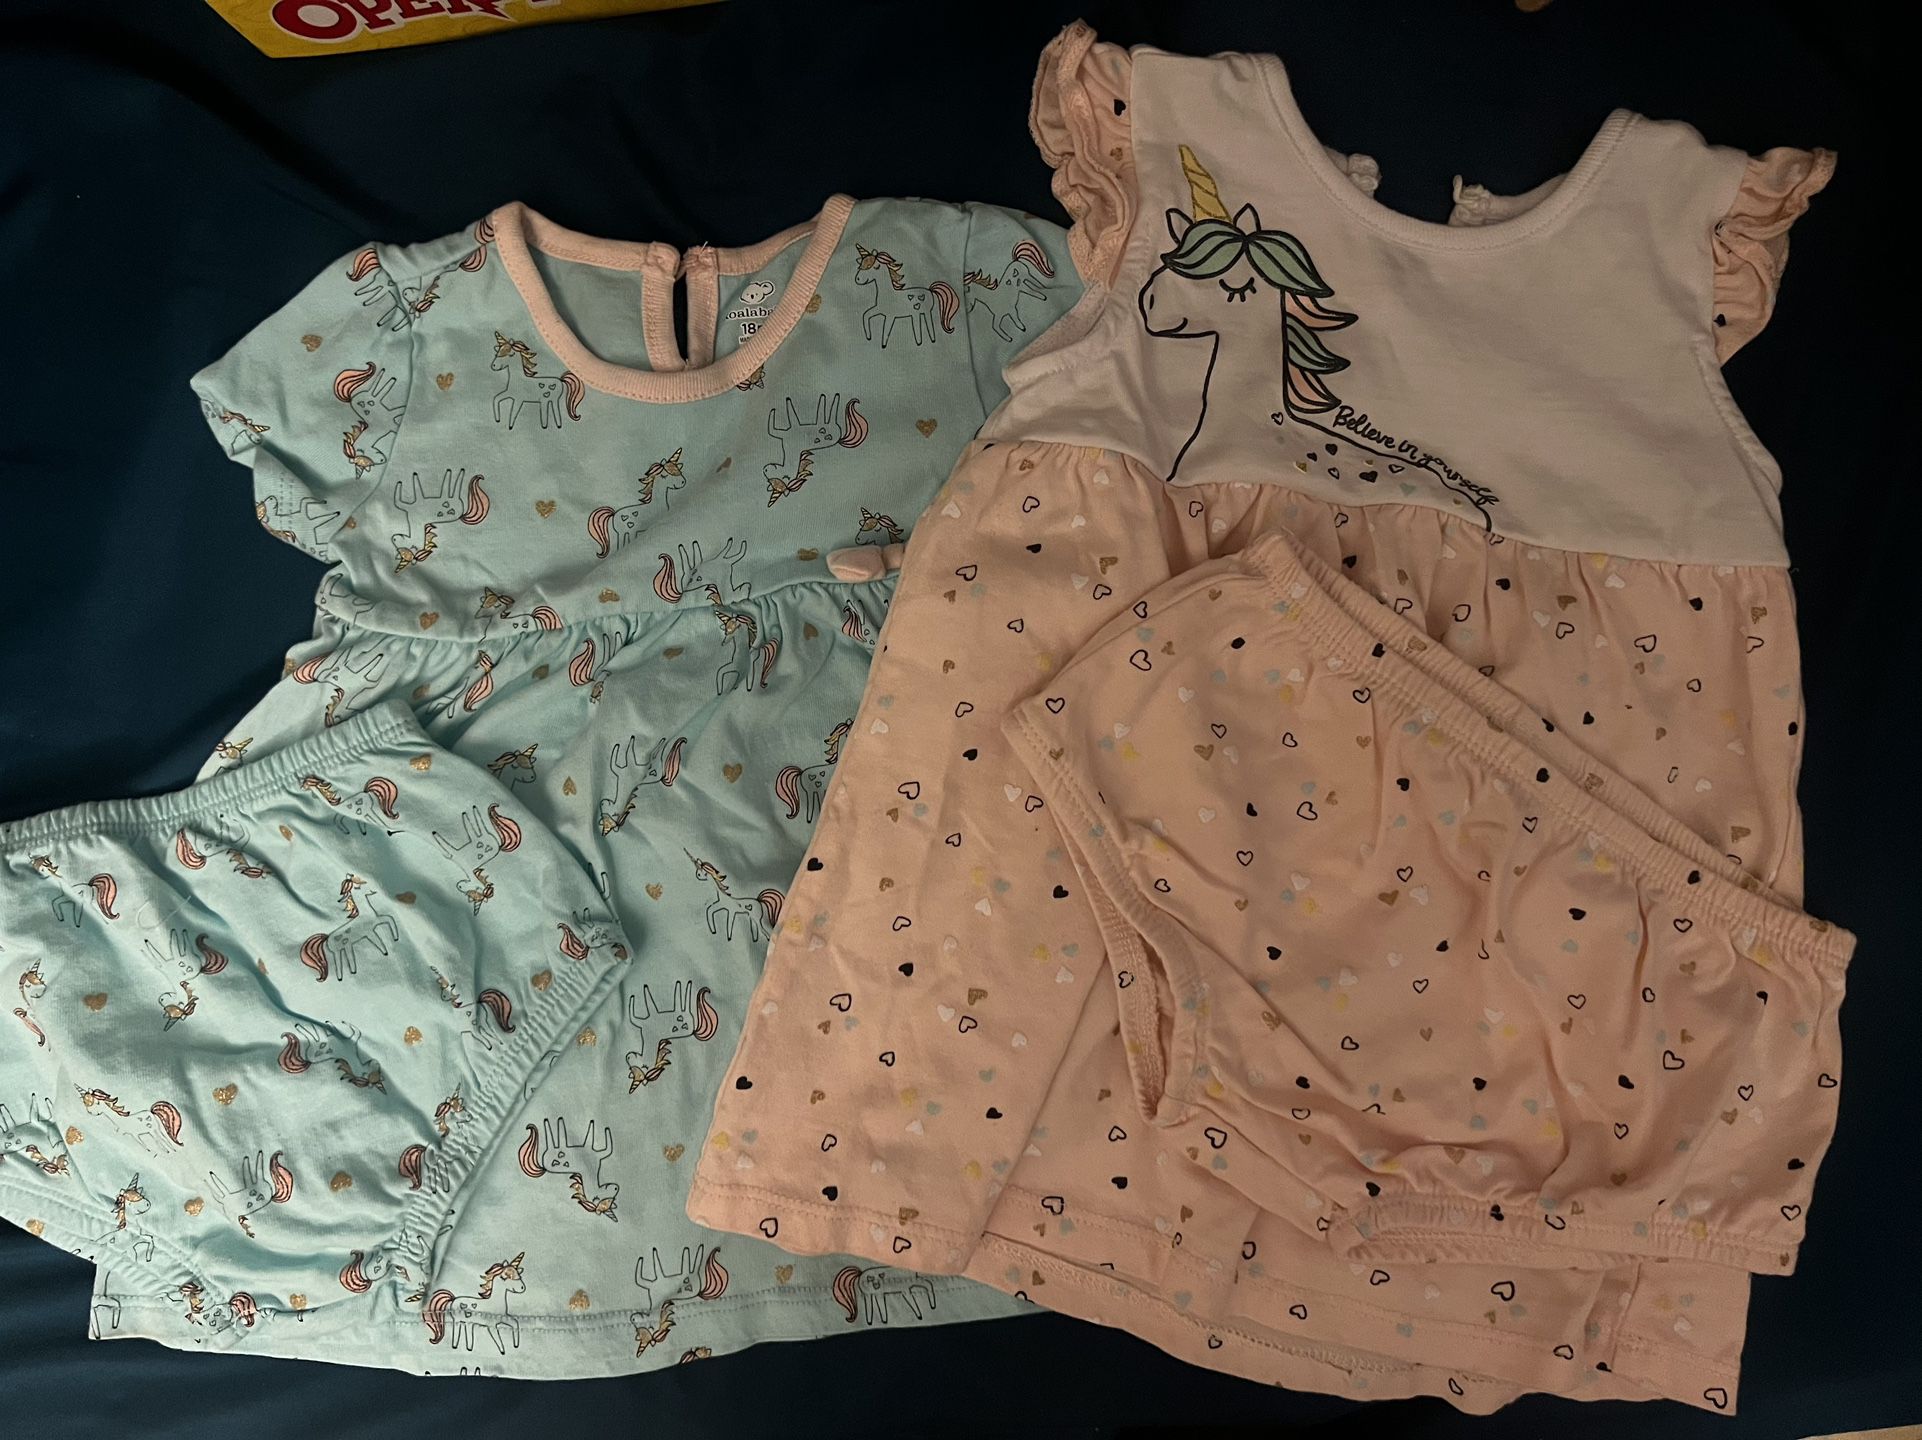 Baby Girl Outfits 